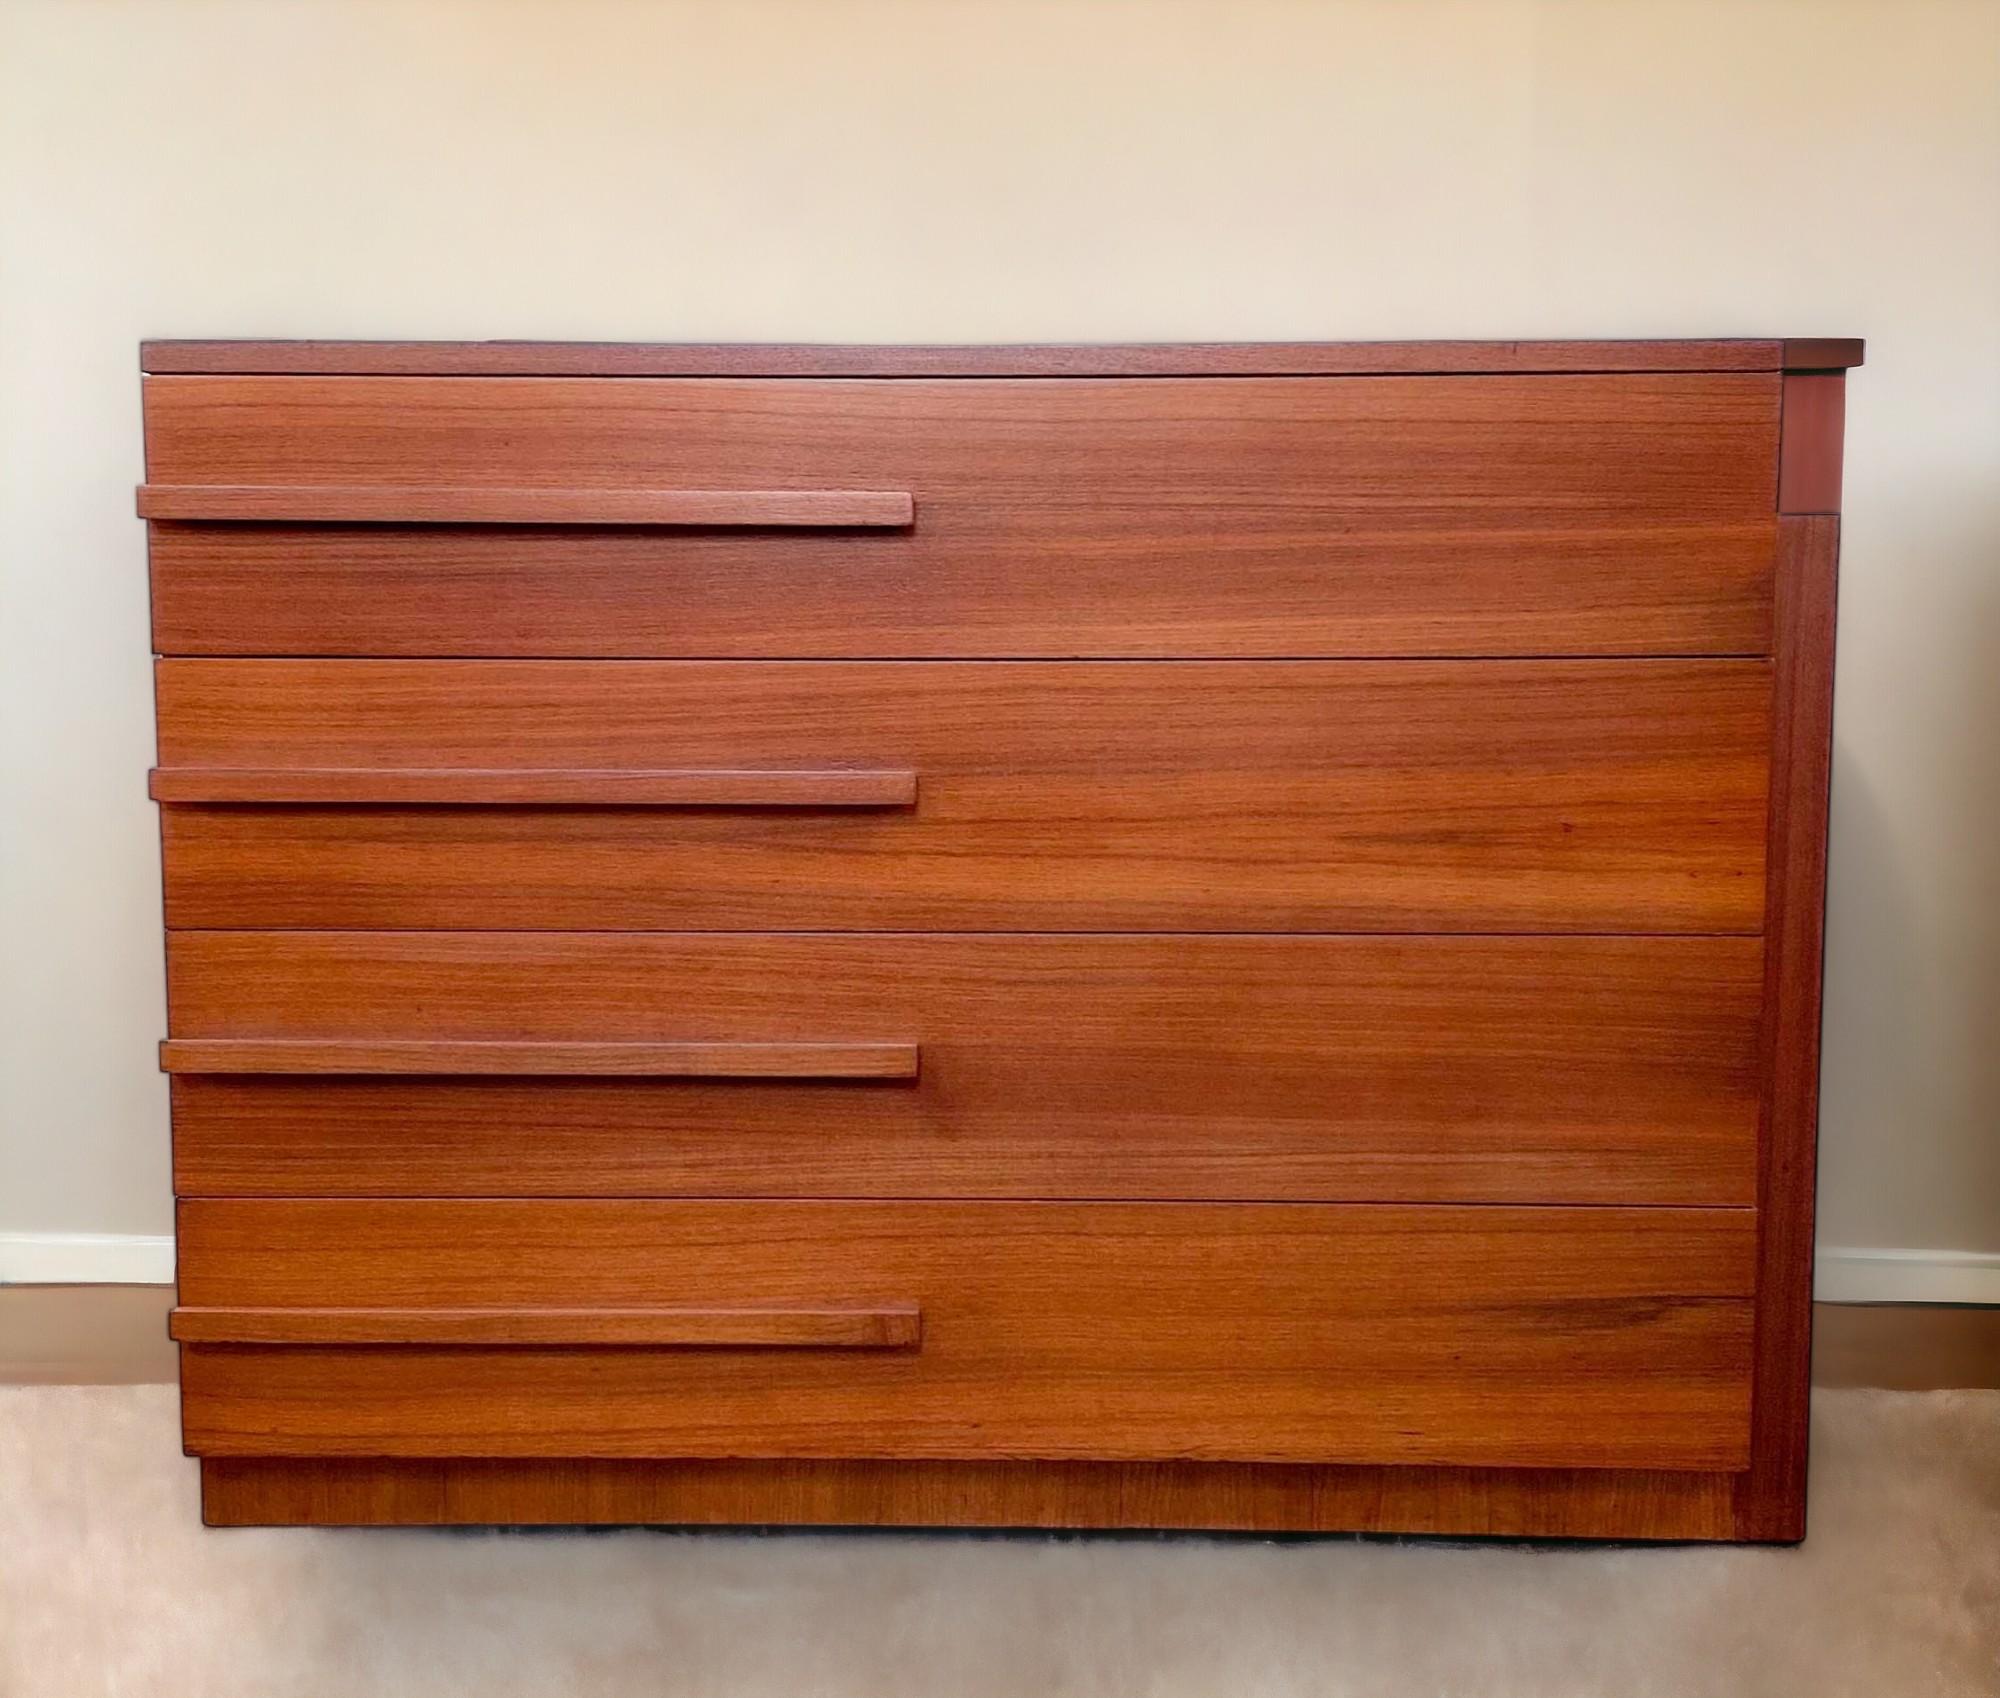 A Streamline four drawer mahogany dresser by Modernage Furniture Company of New York from the 1930s. 
The recessed plinth base continues as a raised panel along the right side of the cabinet ending midway up the side of the top drawer. 
This